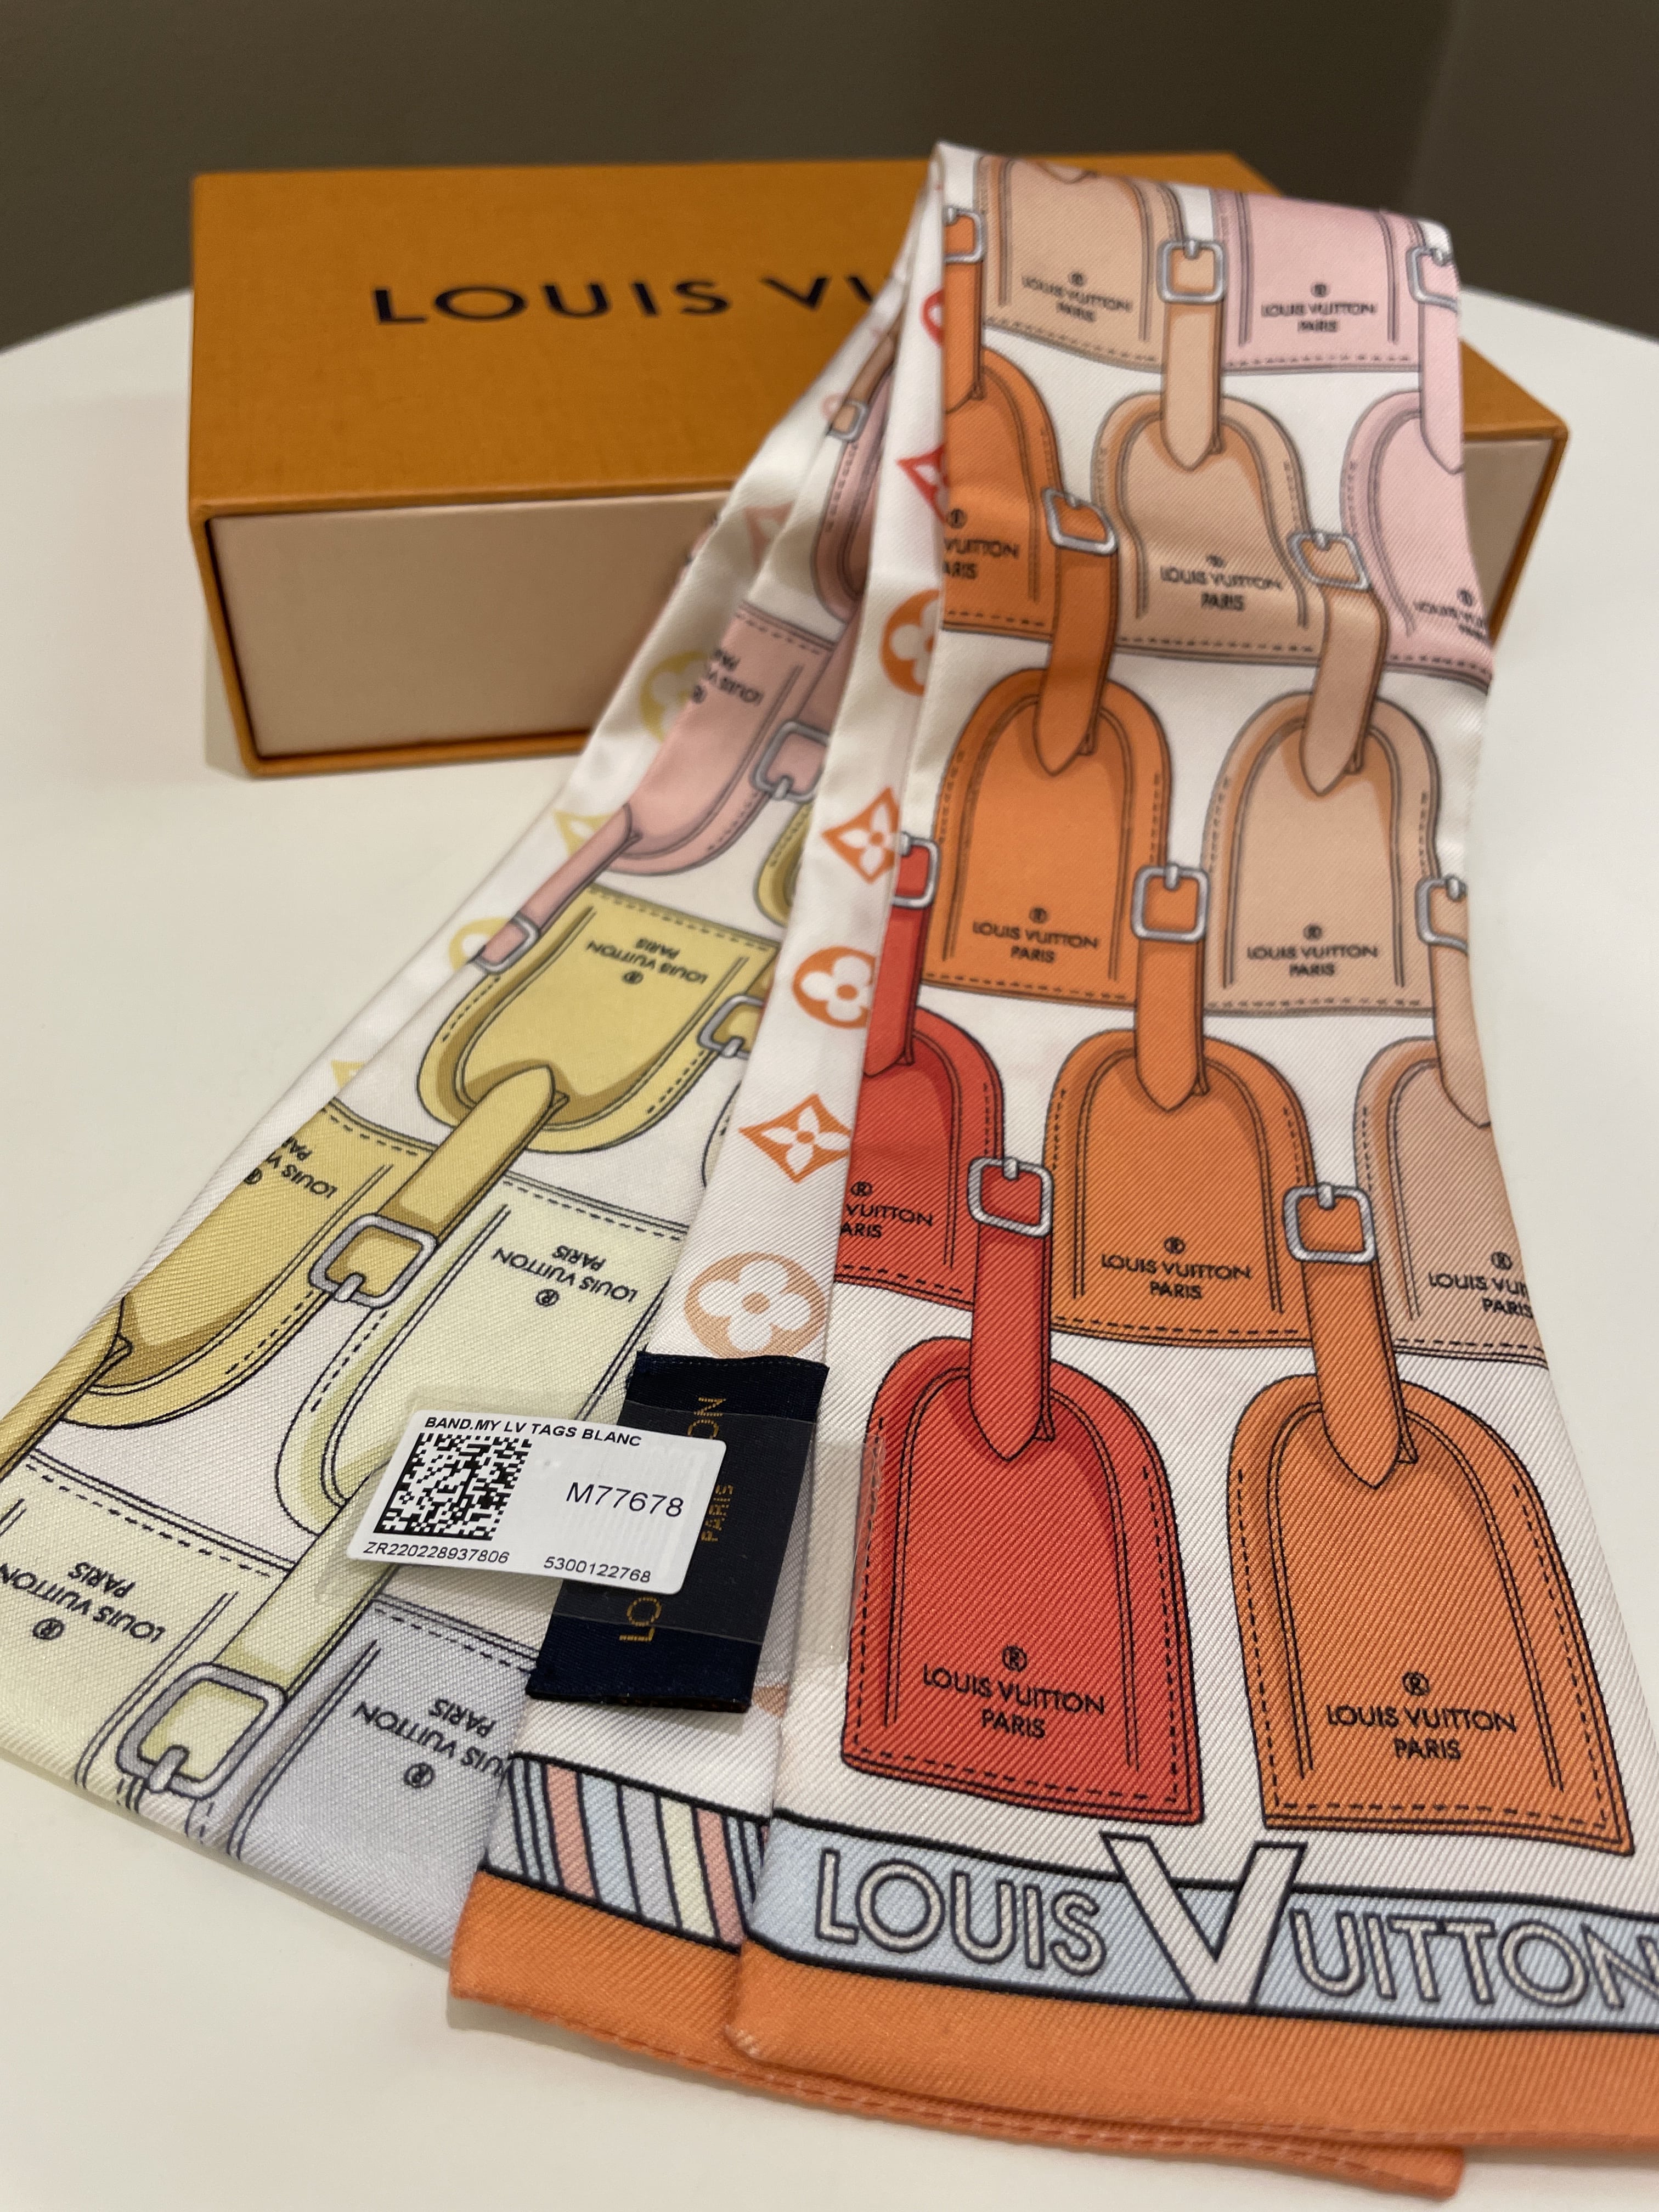 Louis Vuitton Luggage Tag Bandeau
Ombre Red Orange Yellow